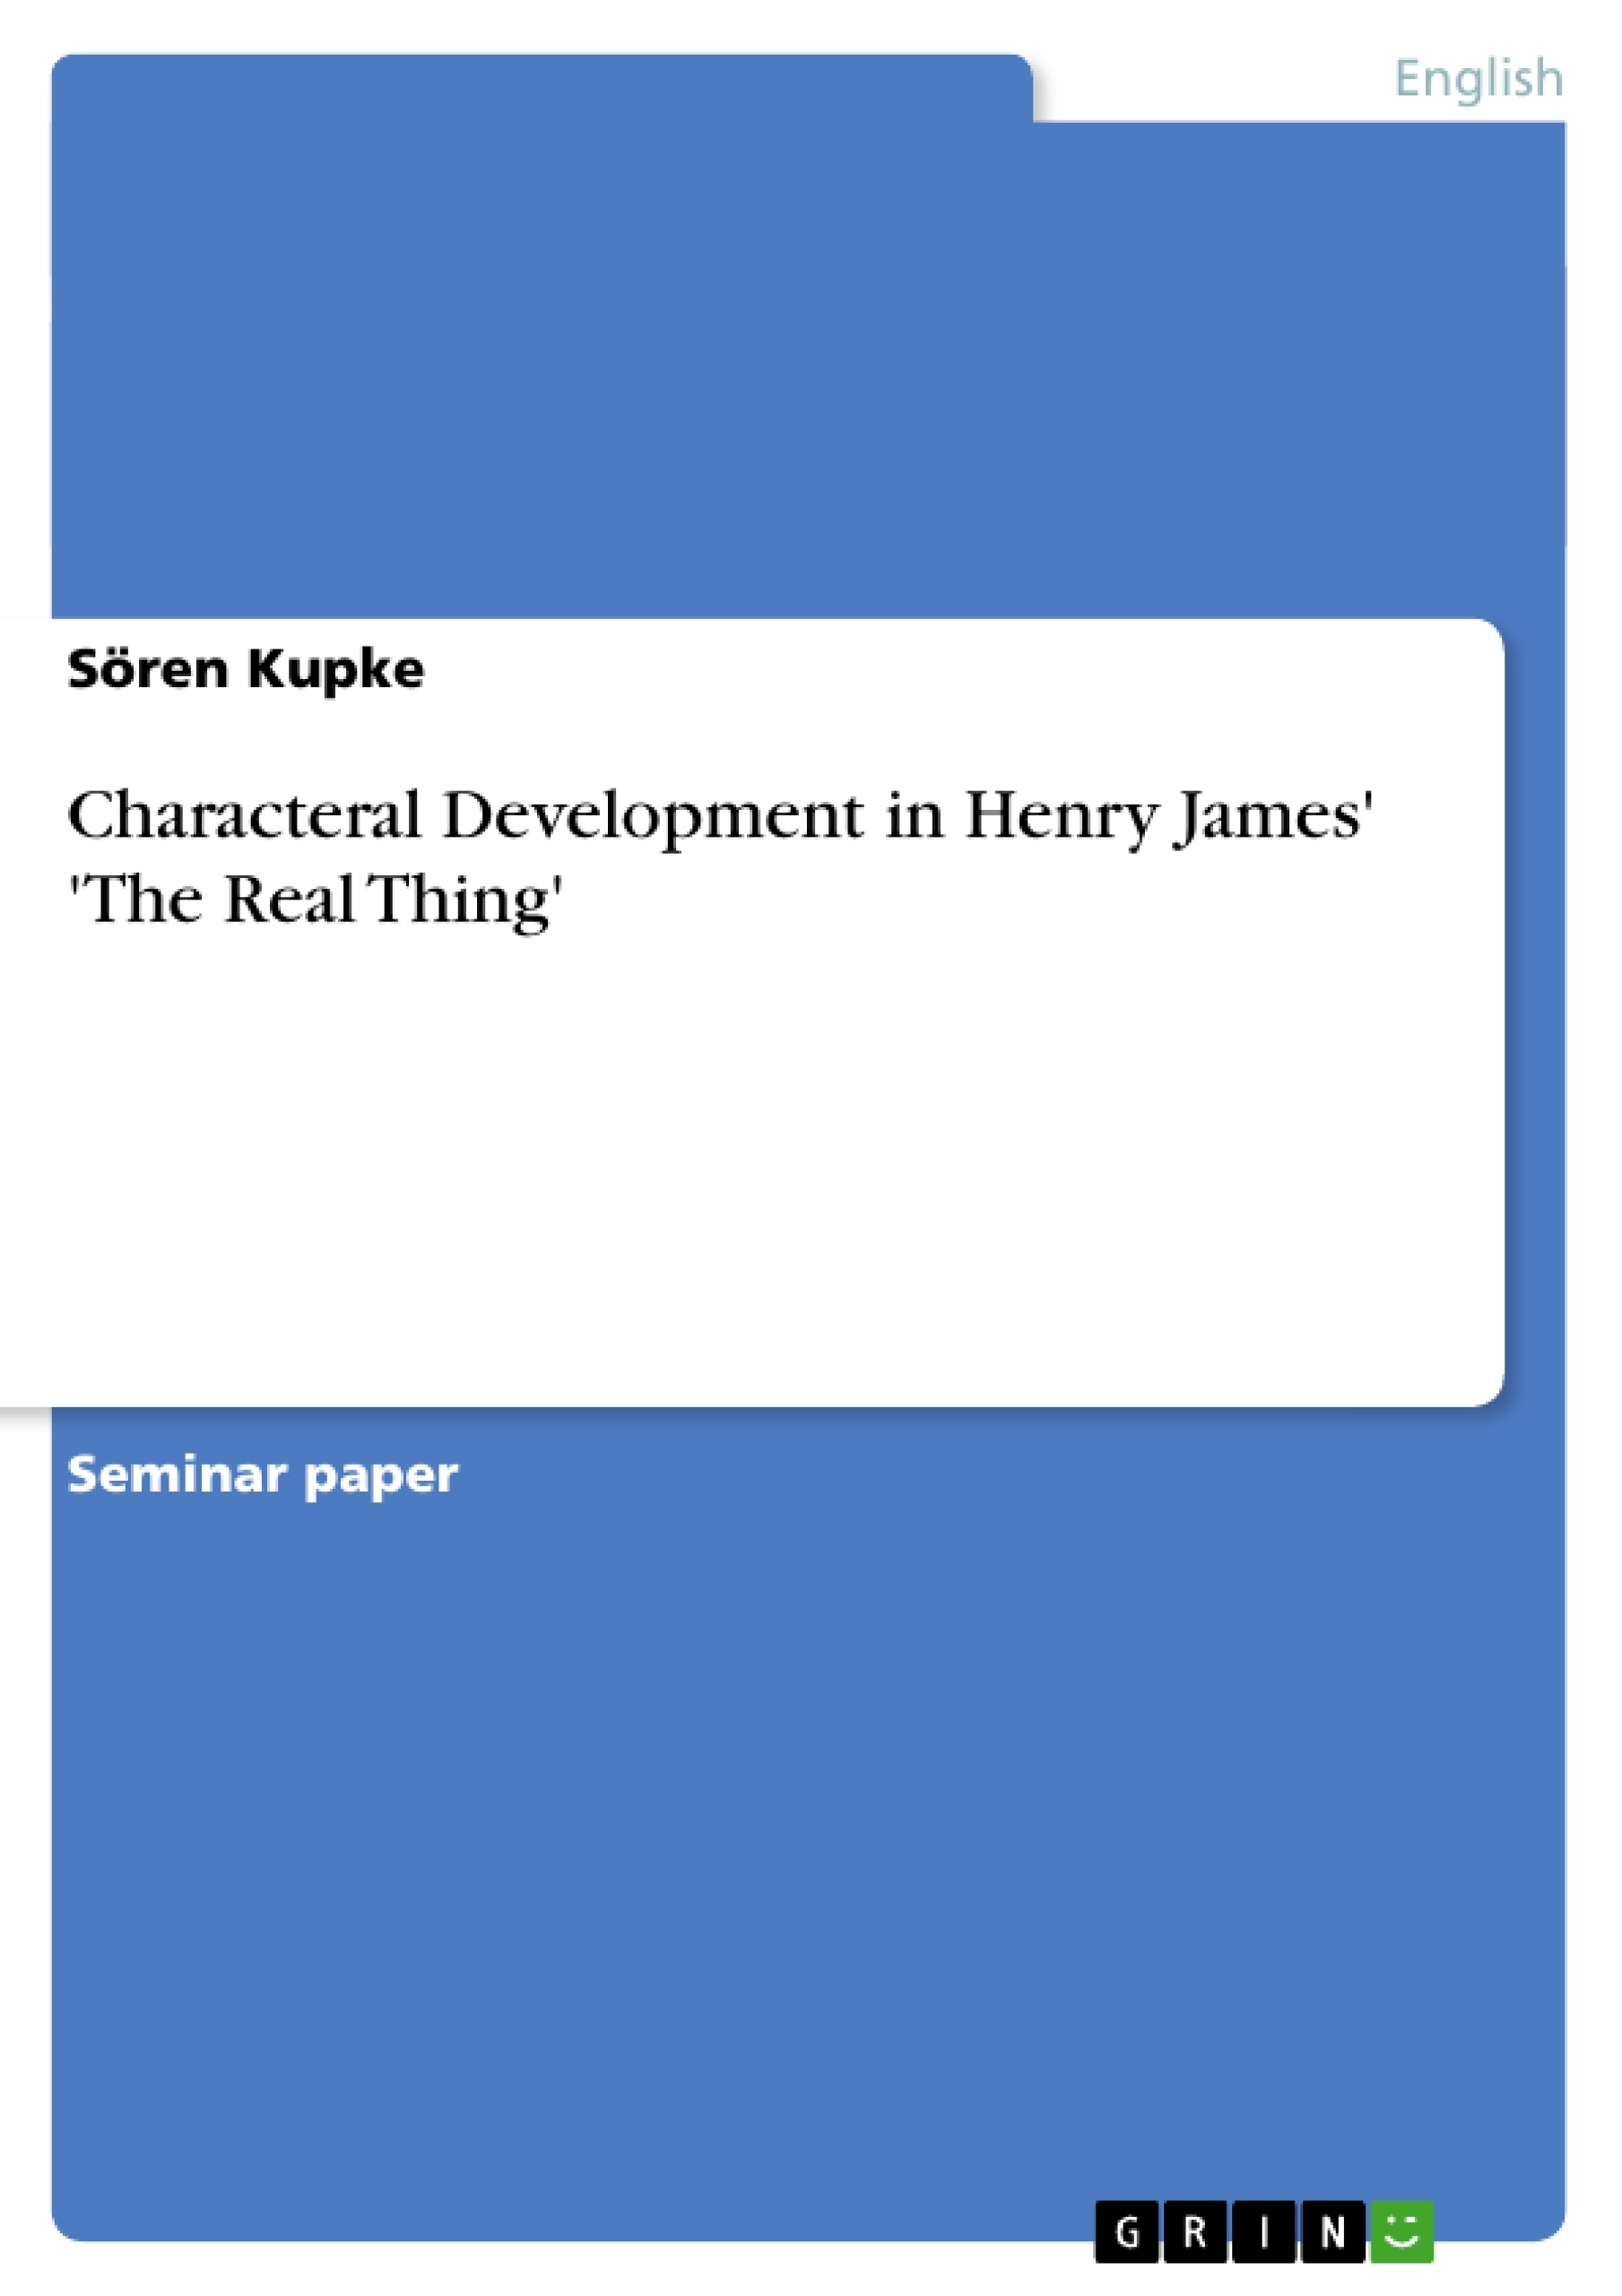 Título: Characteral Development in Henry James' 'The Real Thing'